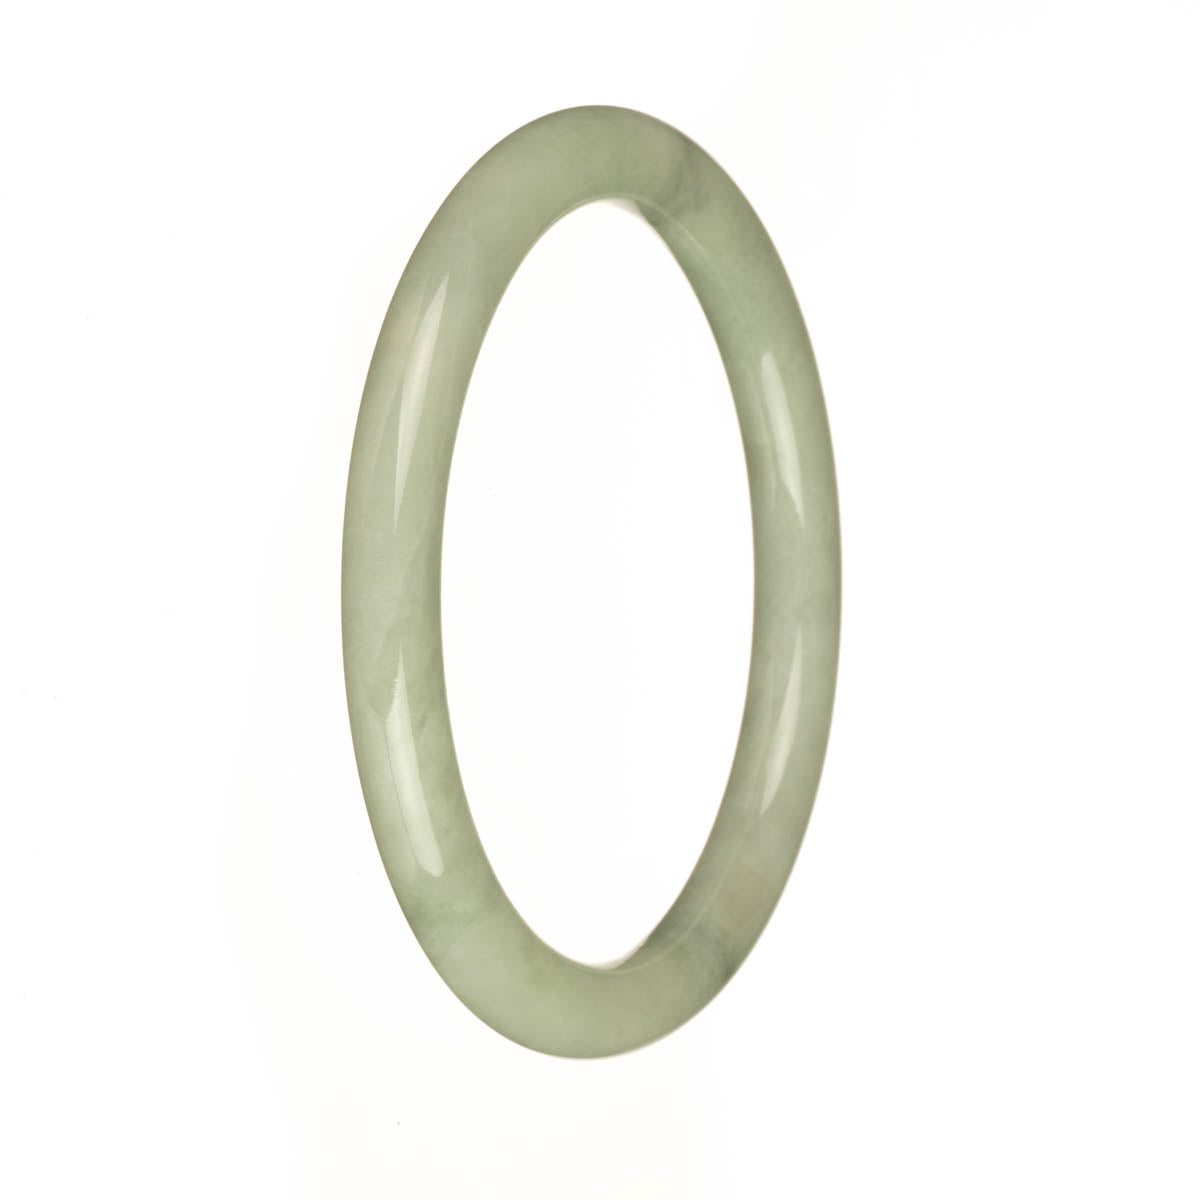 A petite round green jade bangle bracelet, crafted from real natural light green jade.